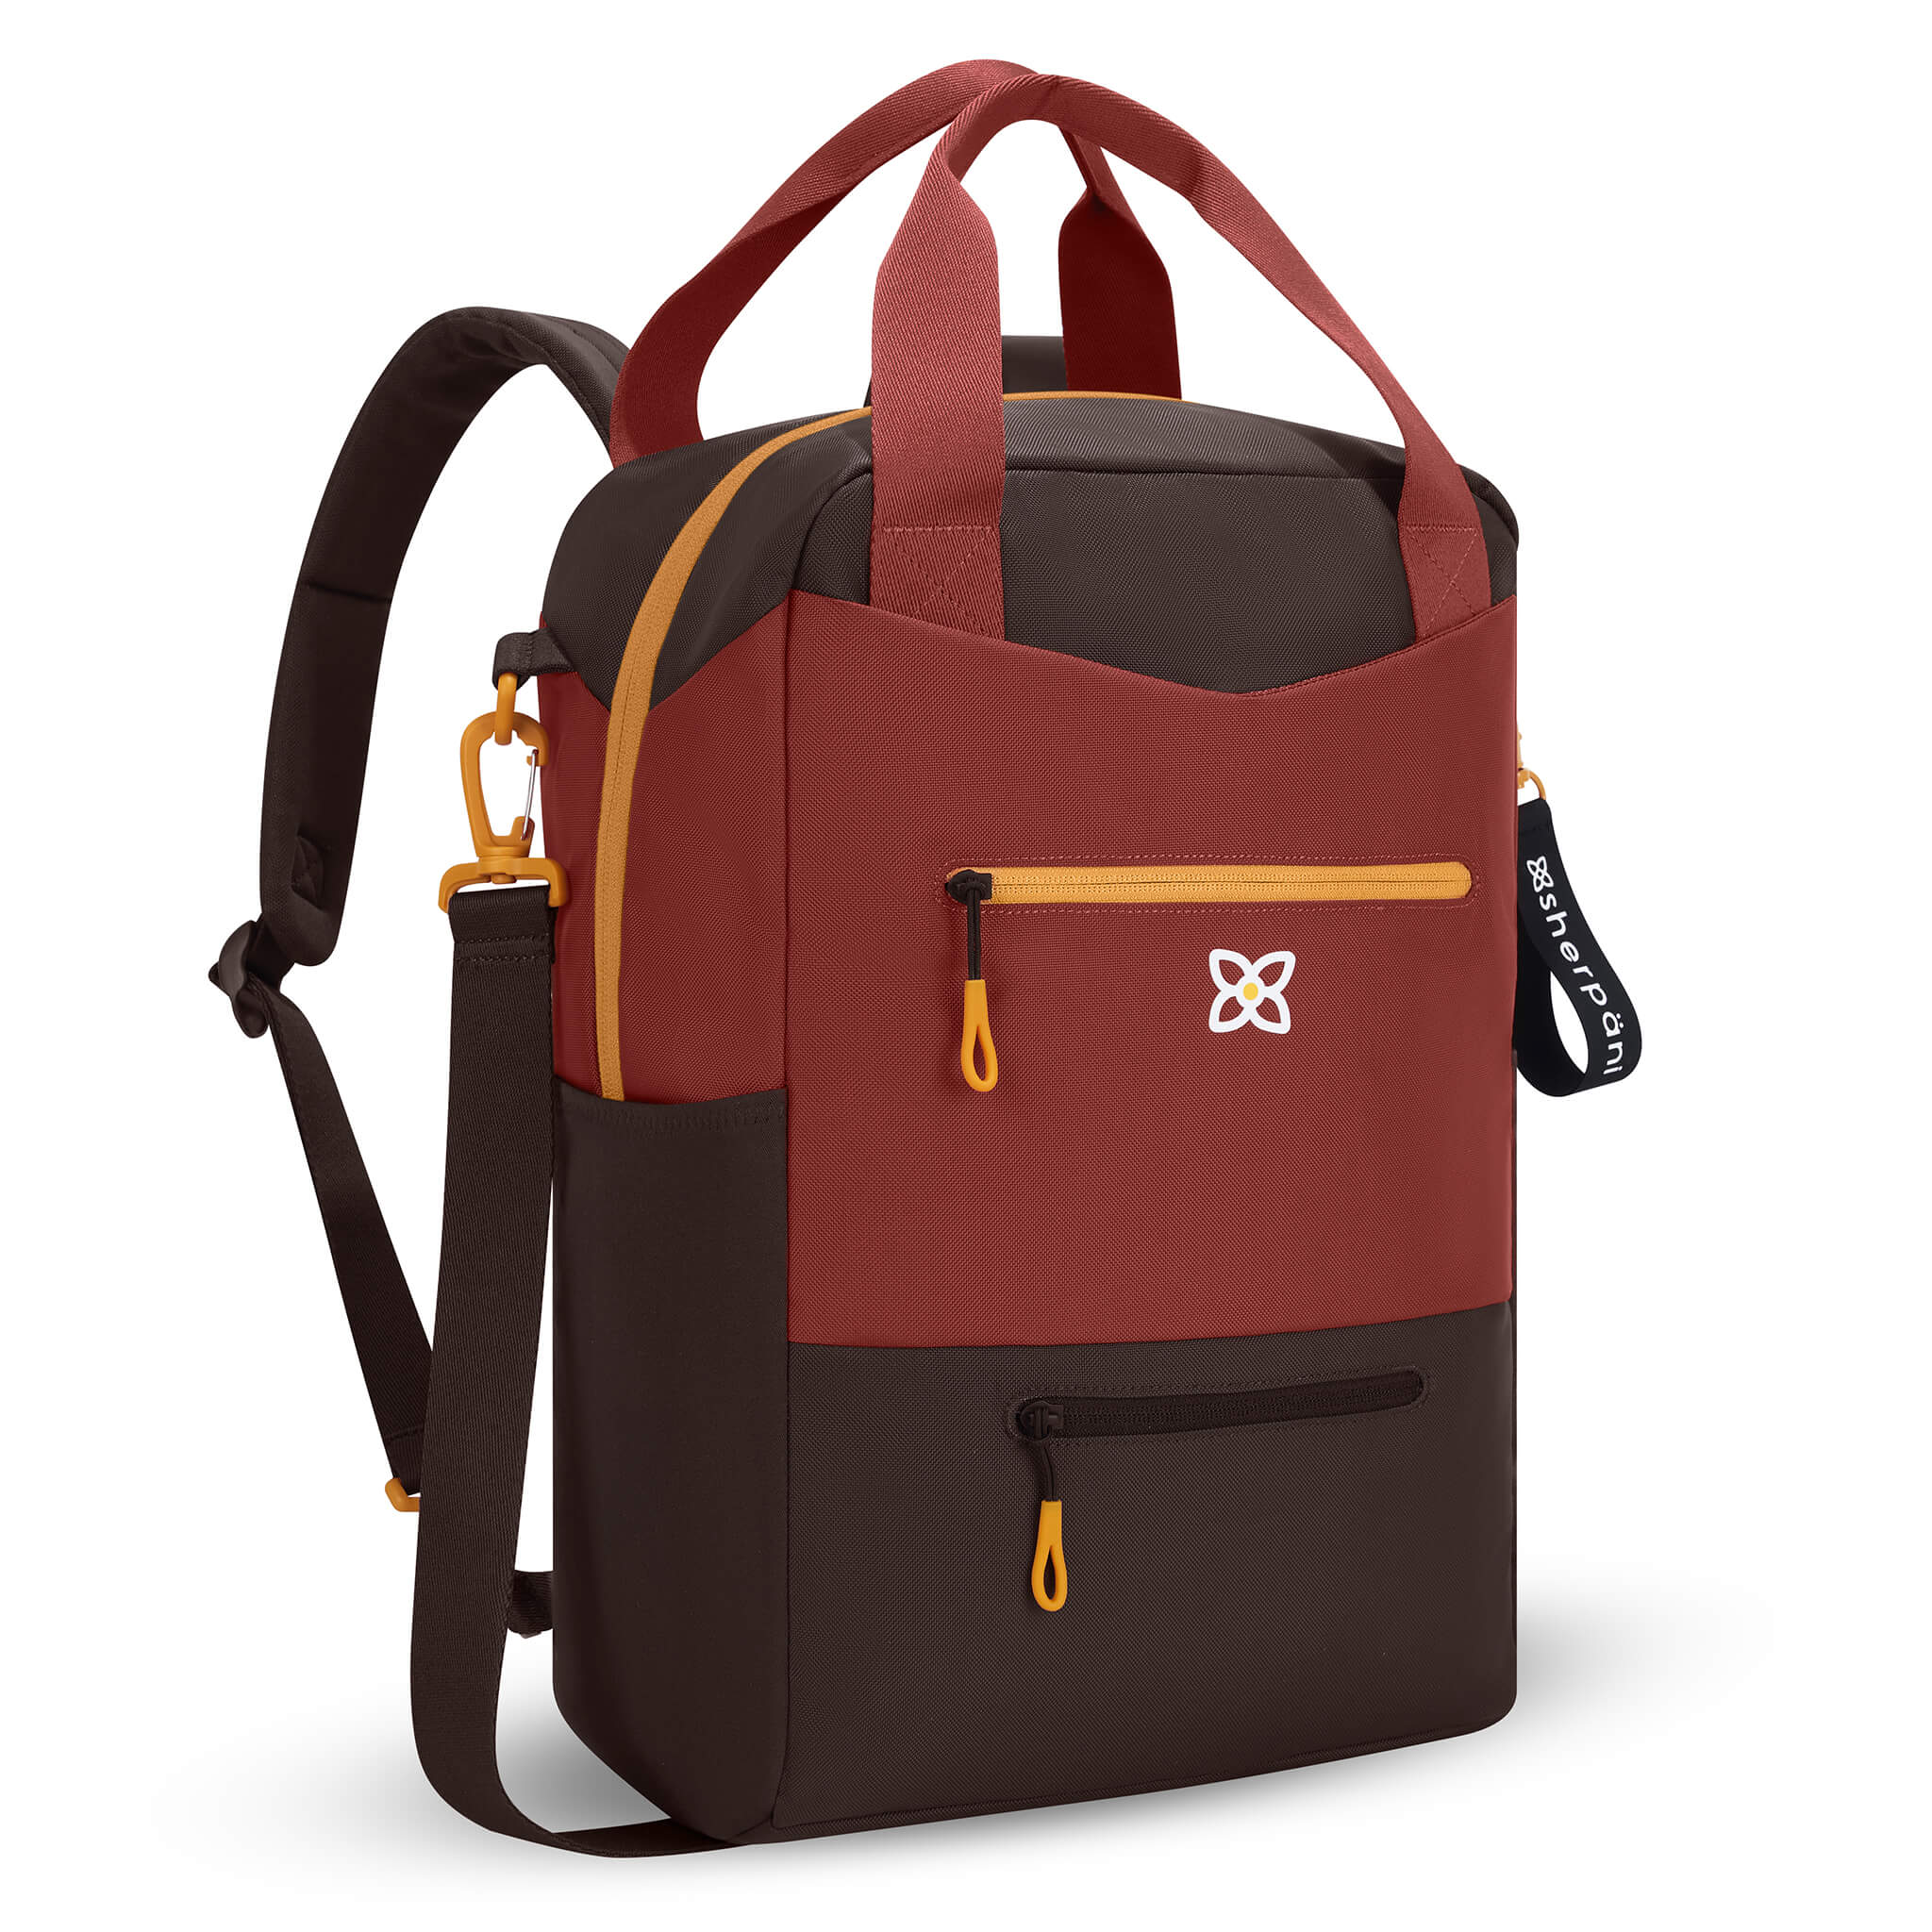 Angled front view of Sherpani convertible travel bag, the Camden in Cider. Camden features include adjustable backpack straps, adjustable crossbody strap, tote bag handles, upper zipper pocket, lower zipper pocket, padded laptop sleeve, three water bottle holders and luggage pass through feature. The Cider color is two tones in burgundy and brown with accents in yellow. #color_cider